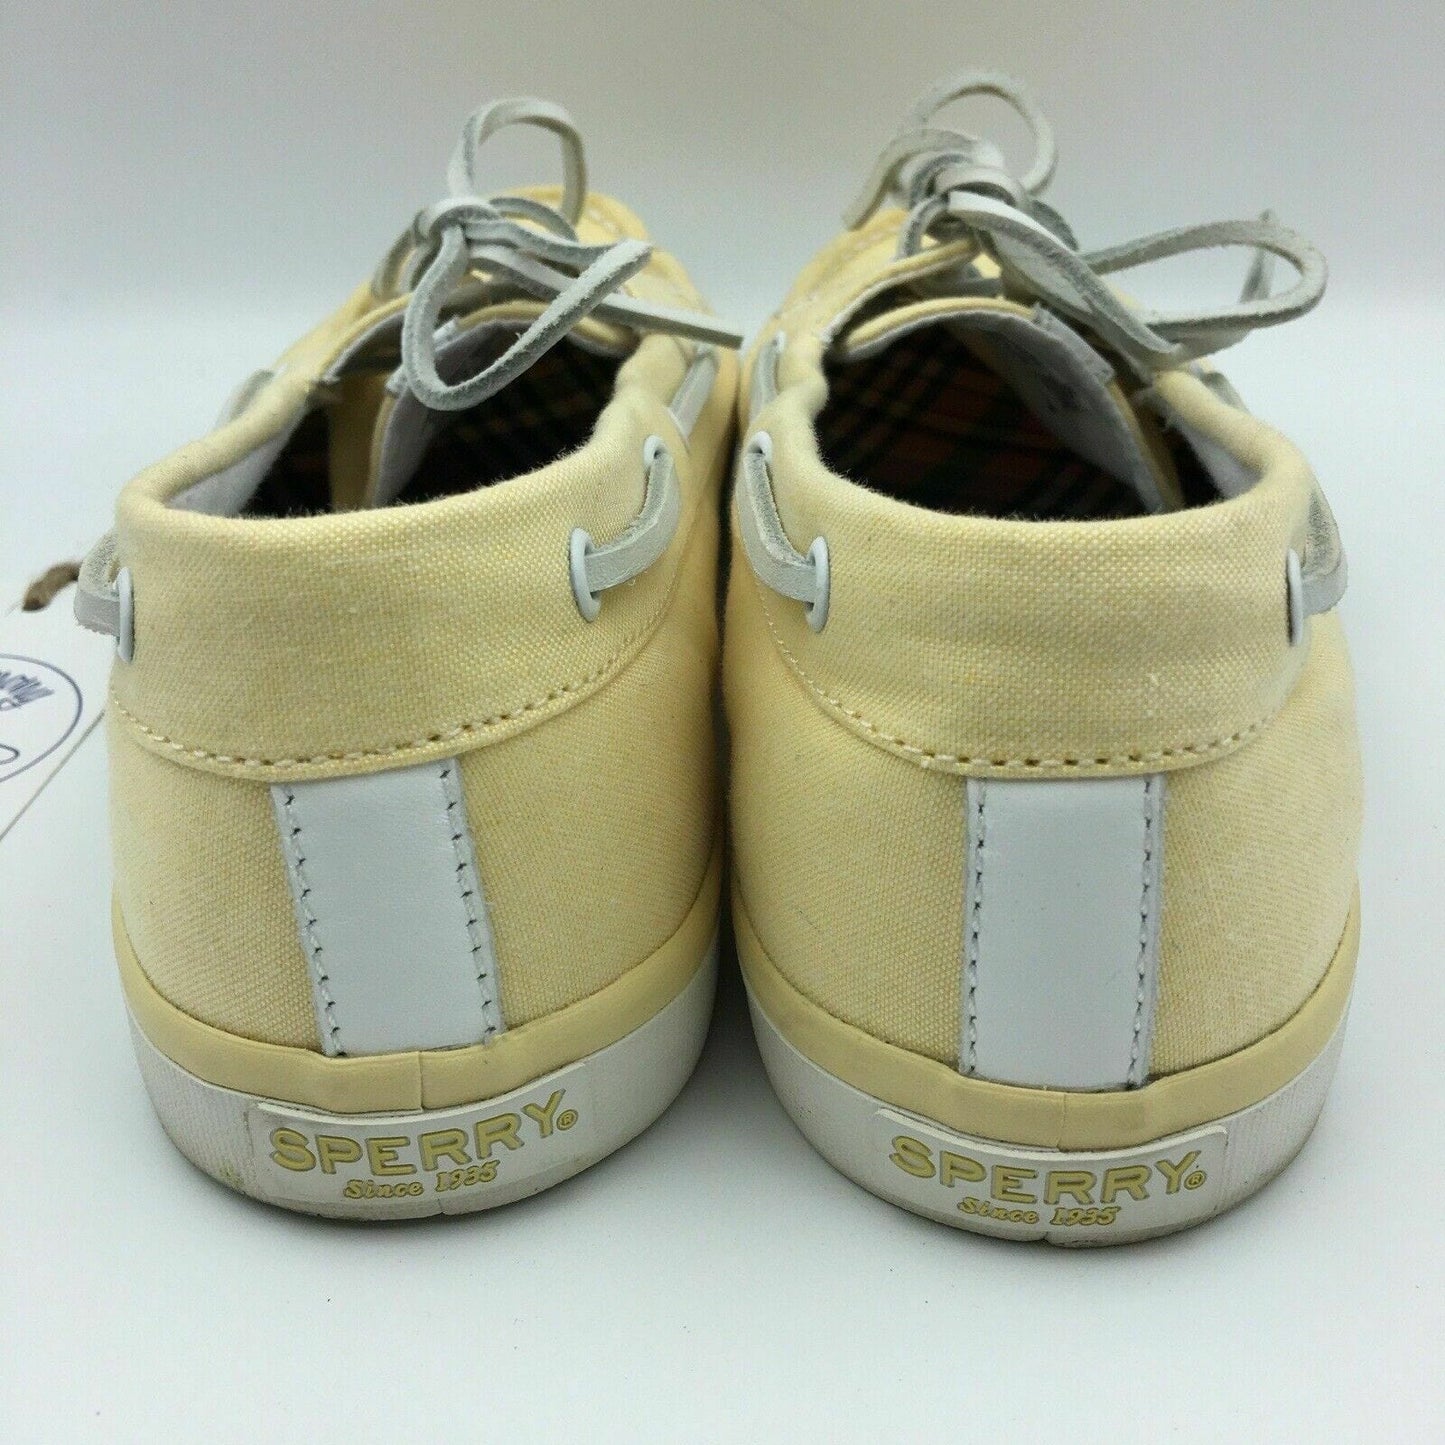 Sperry Top Sider Womens Shoes Size 9 Light Yellow with Memory Foam Insoles